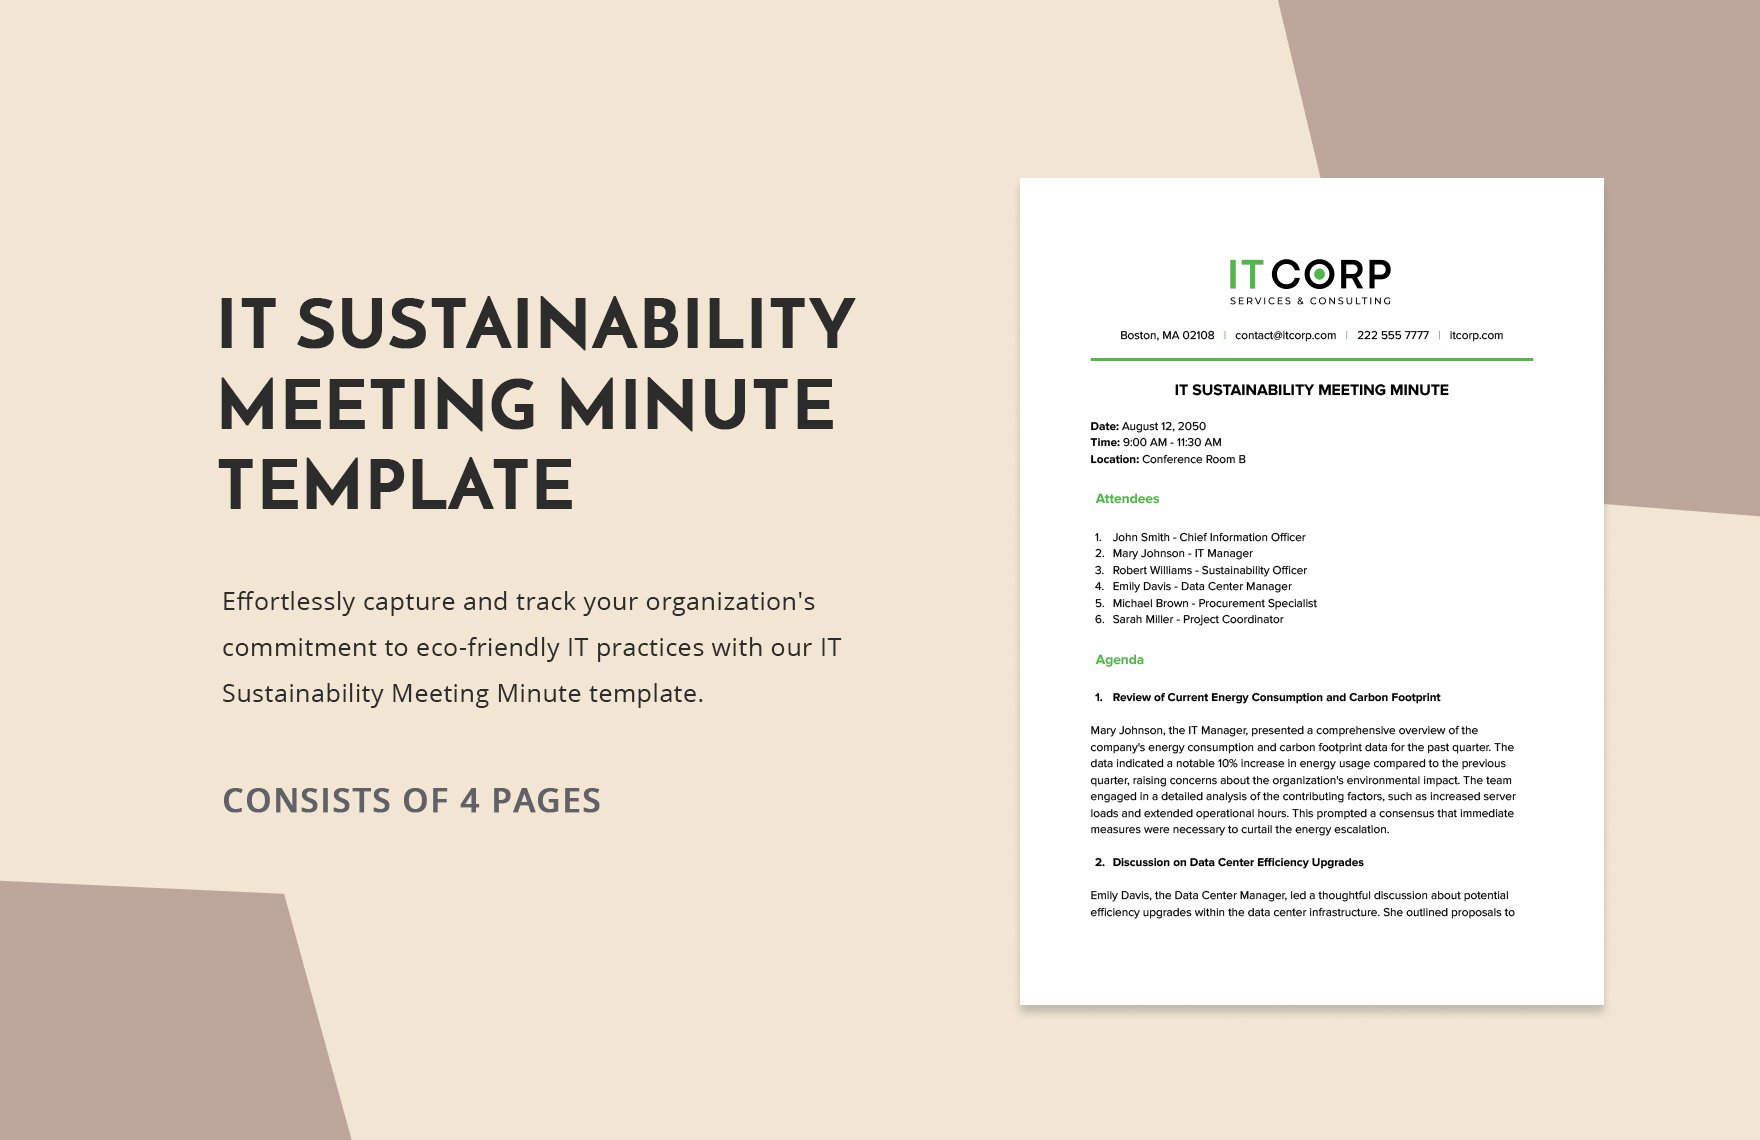 IT Sustainability Meeting Minute Template